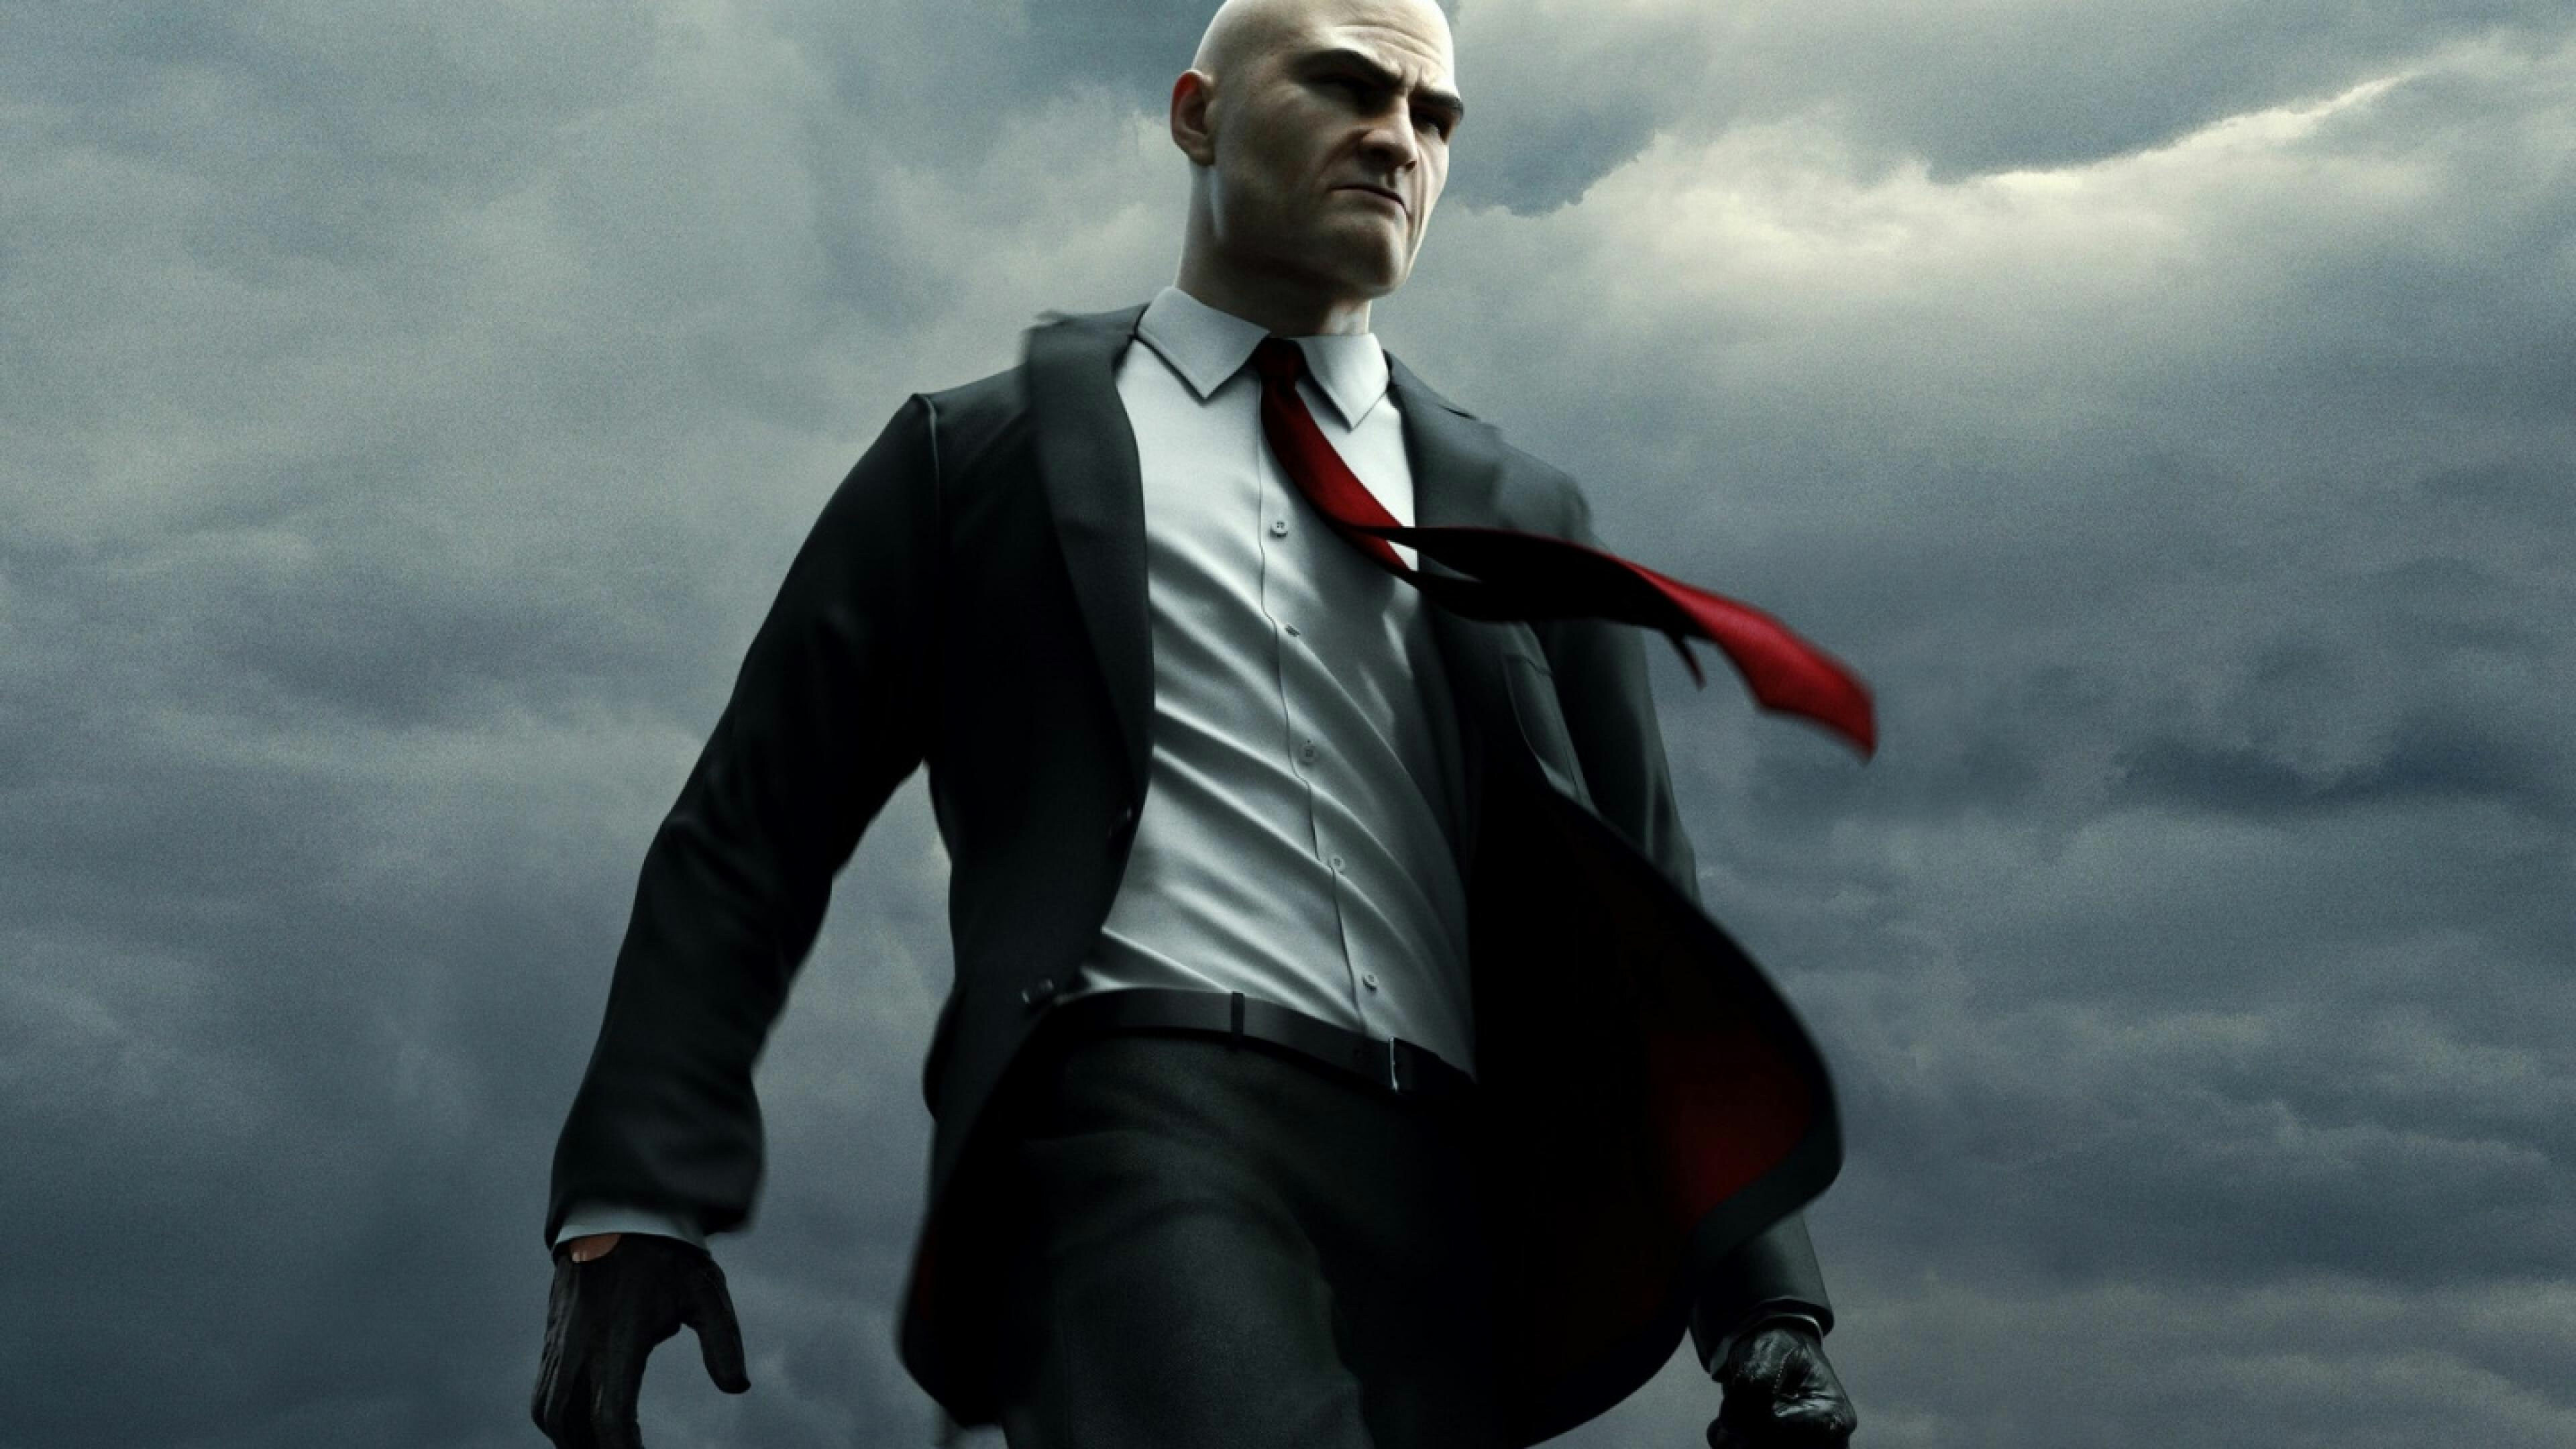 Hitman Game Gaming, Ultra HD wallpapers, Thrilling missions, Stealth gameplay, 3840x2160 4K Desktop